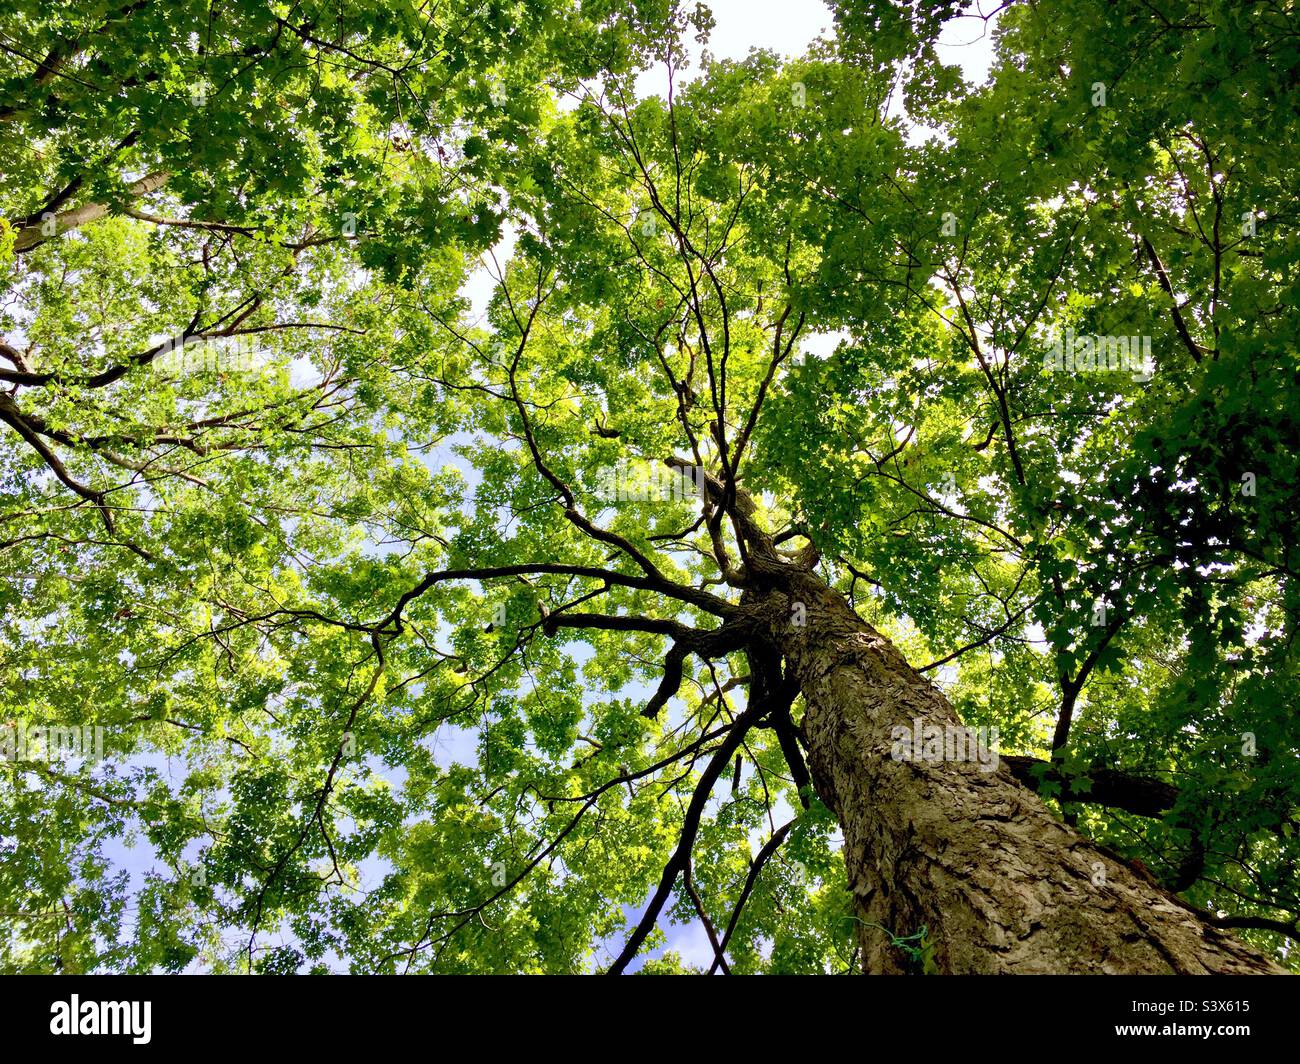 Looking up into the canopy of old-growth trees, Ontario. Green leaves everywhere. Blue sky. Stock Photo